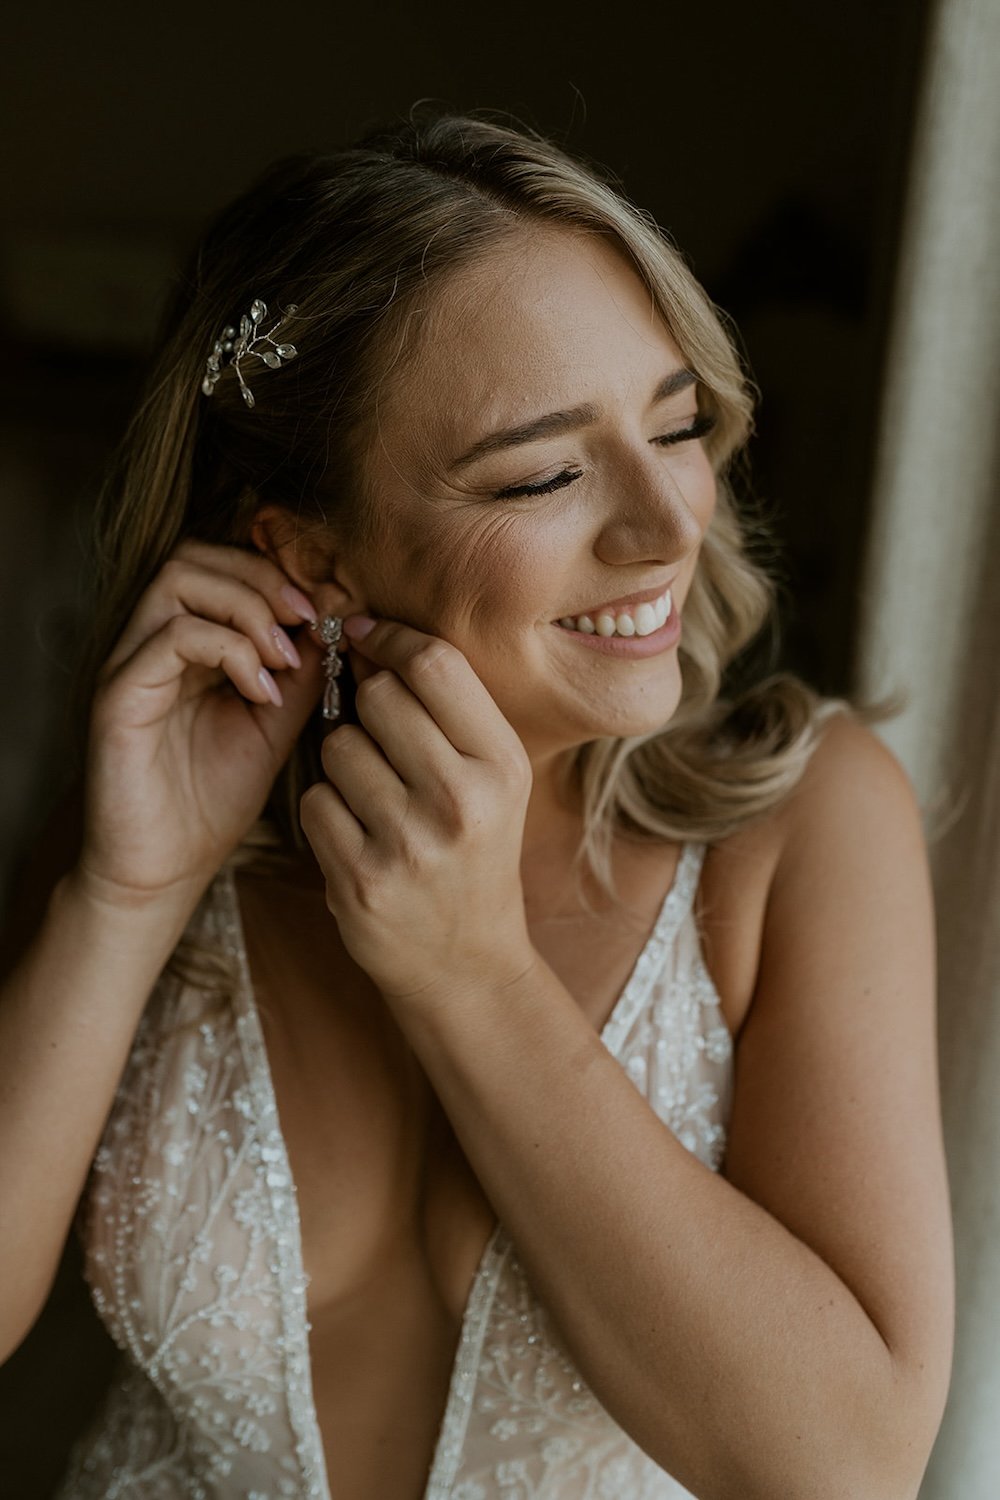 The bride smiles happily as she puts her bridal jewelry on.